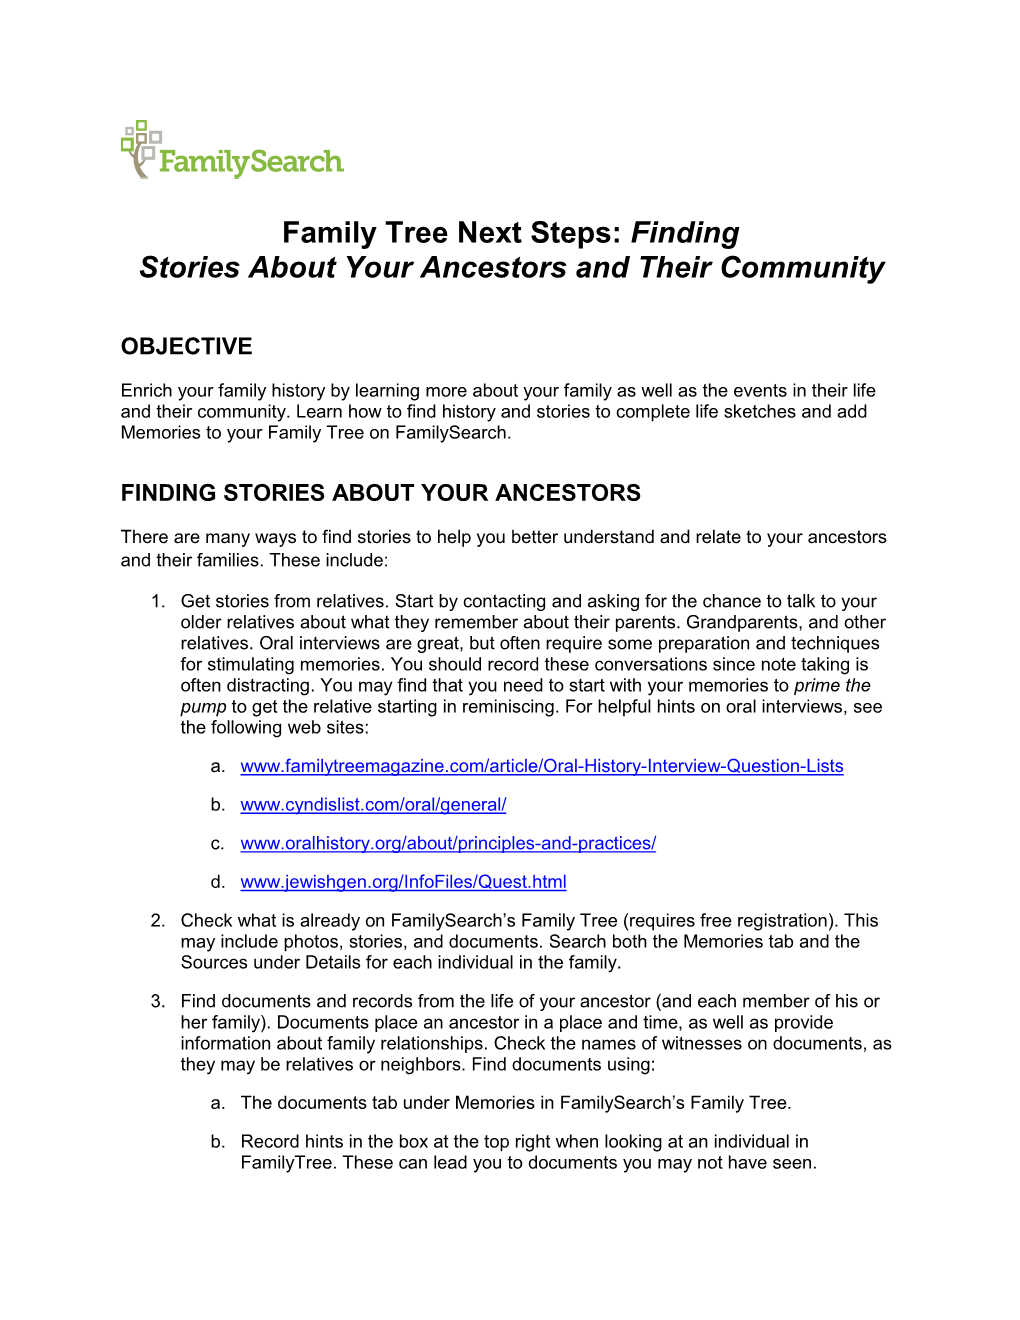 Family Tree Next Steps: Finding Stories About Your Ancestors and Their Community